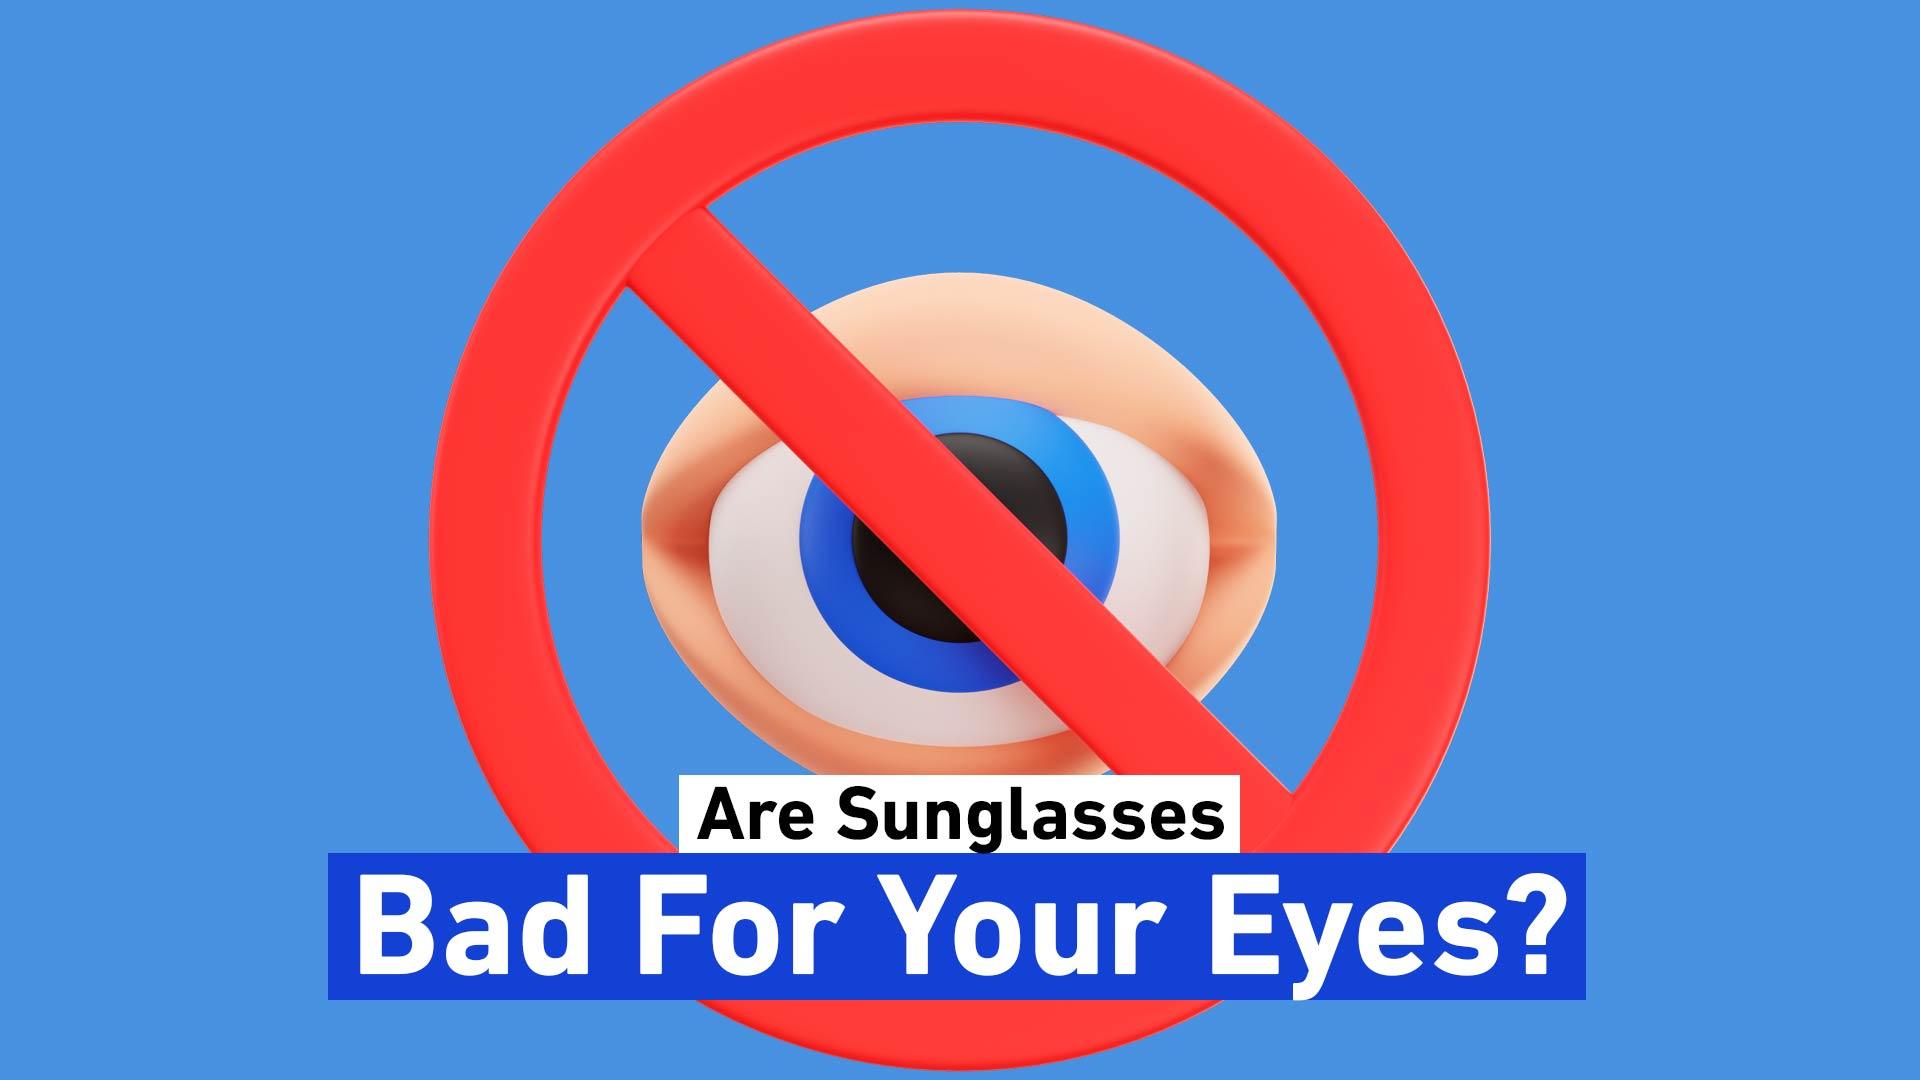 Are Sunglasses Bad For Your Eyes?